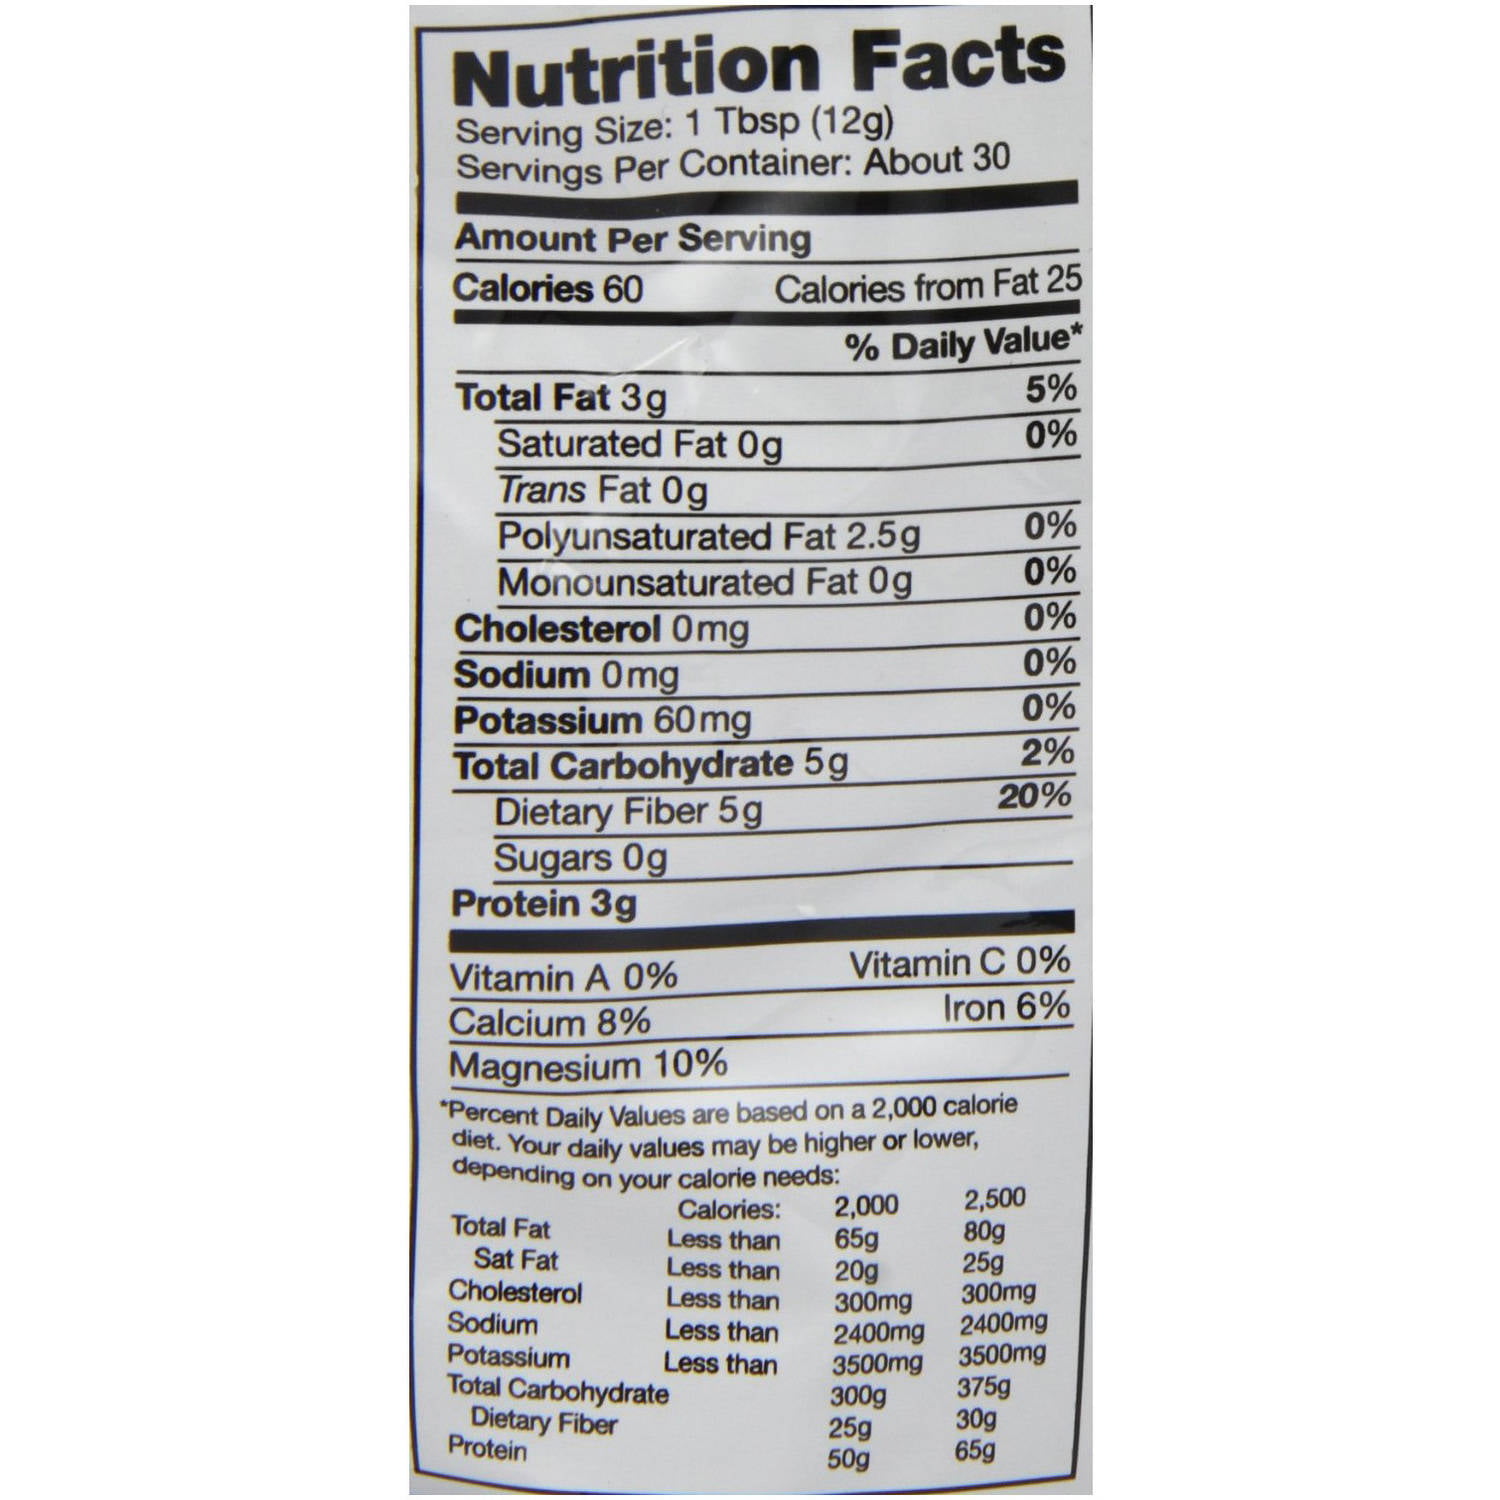 Nutrition Facts On Chia Seeds Nutrition Daily regarding Nutrition Facts Chia Seeds